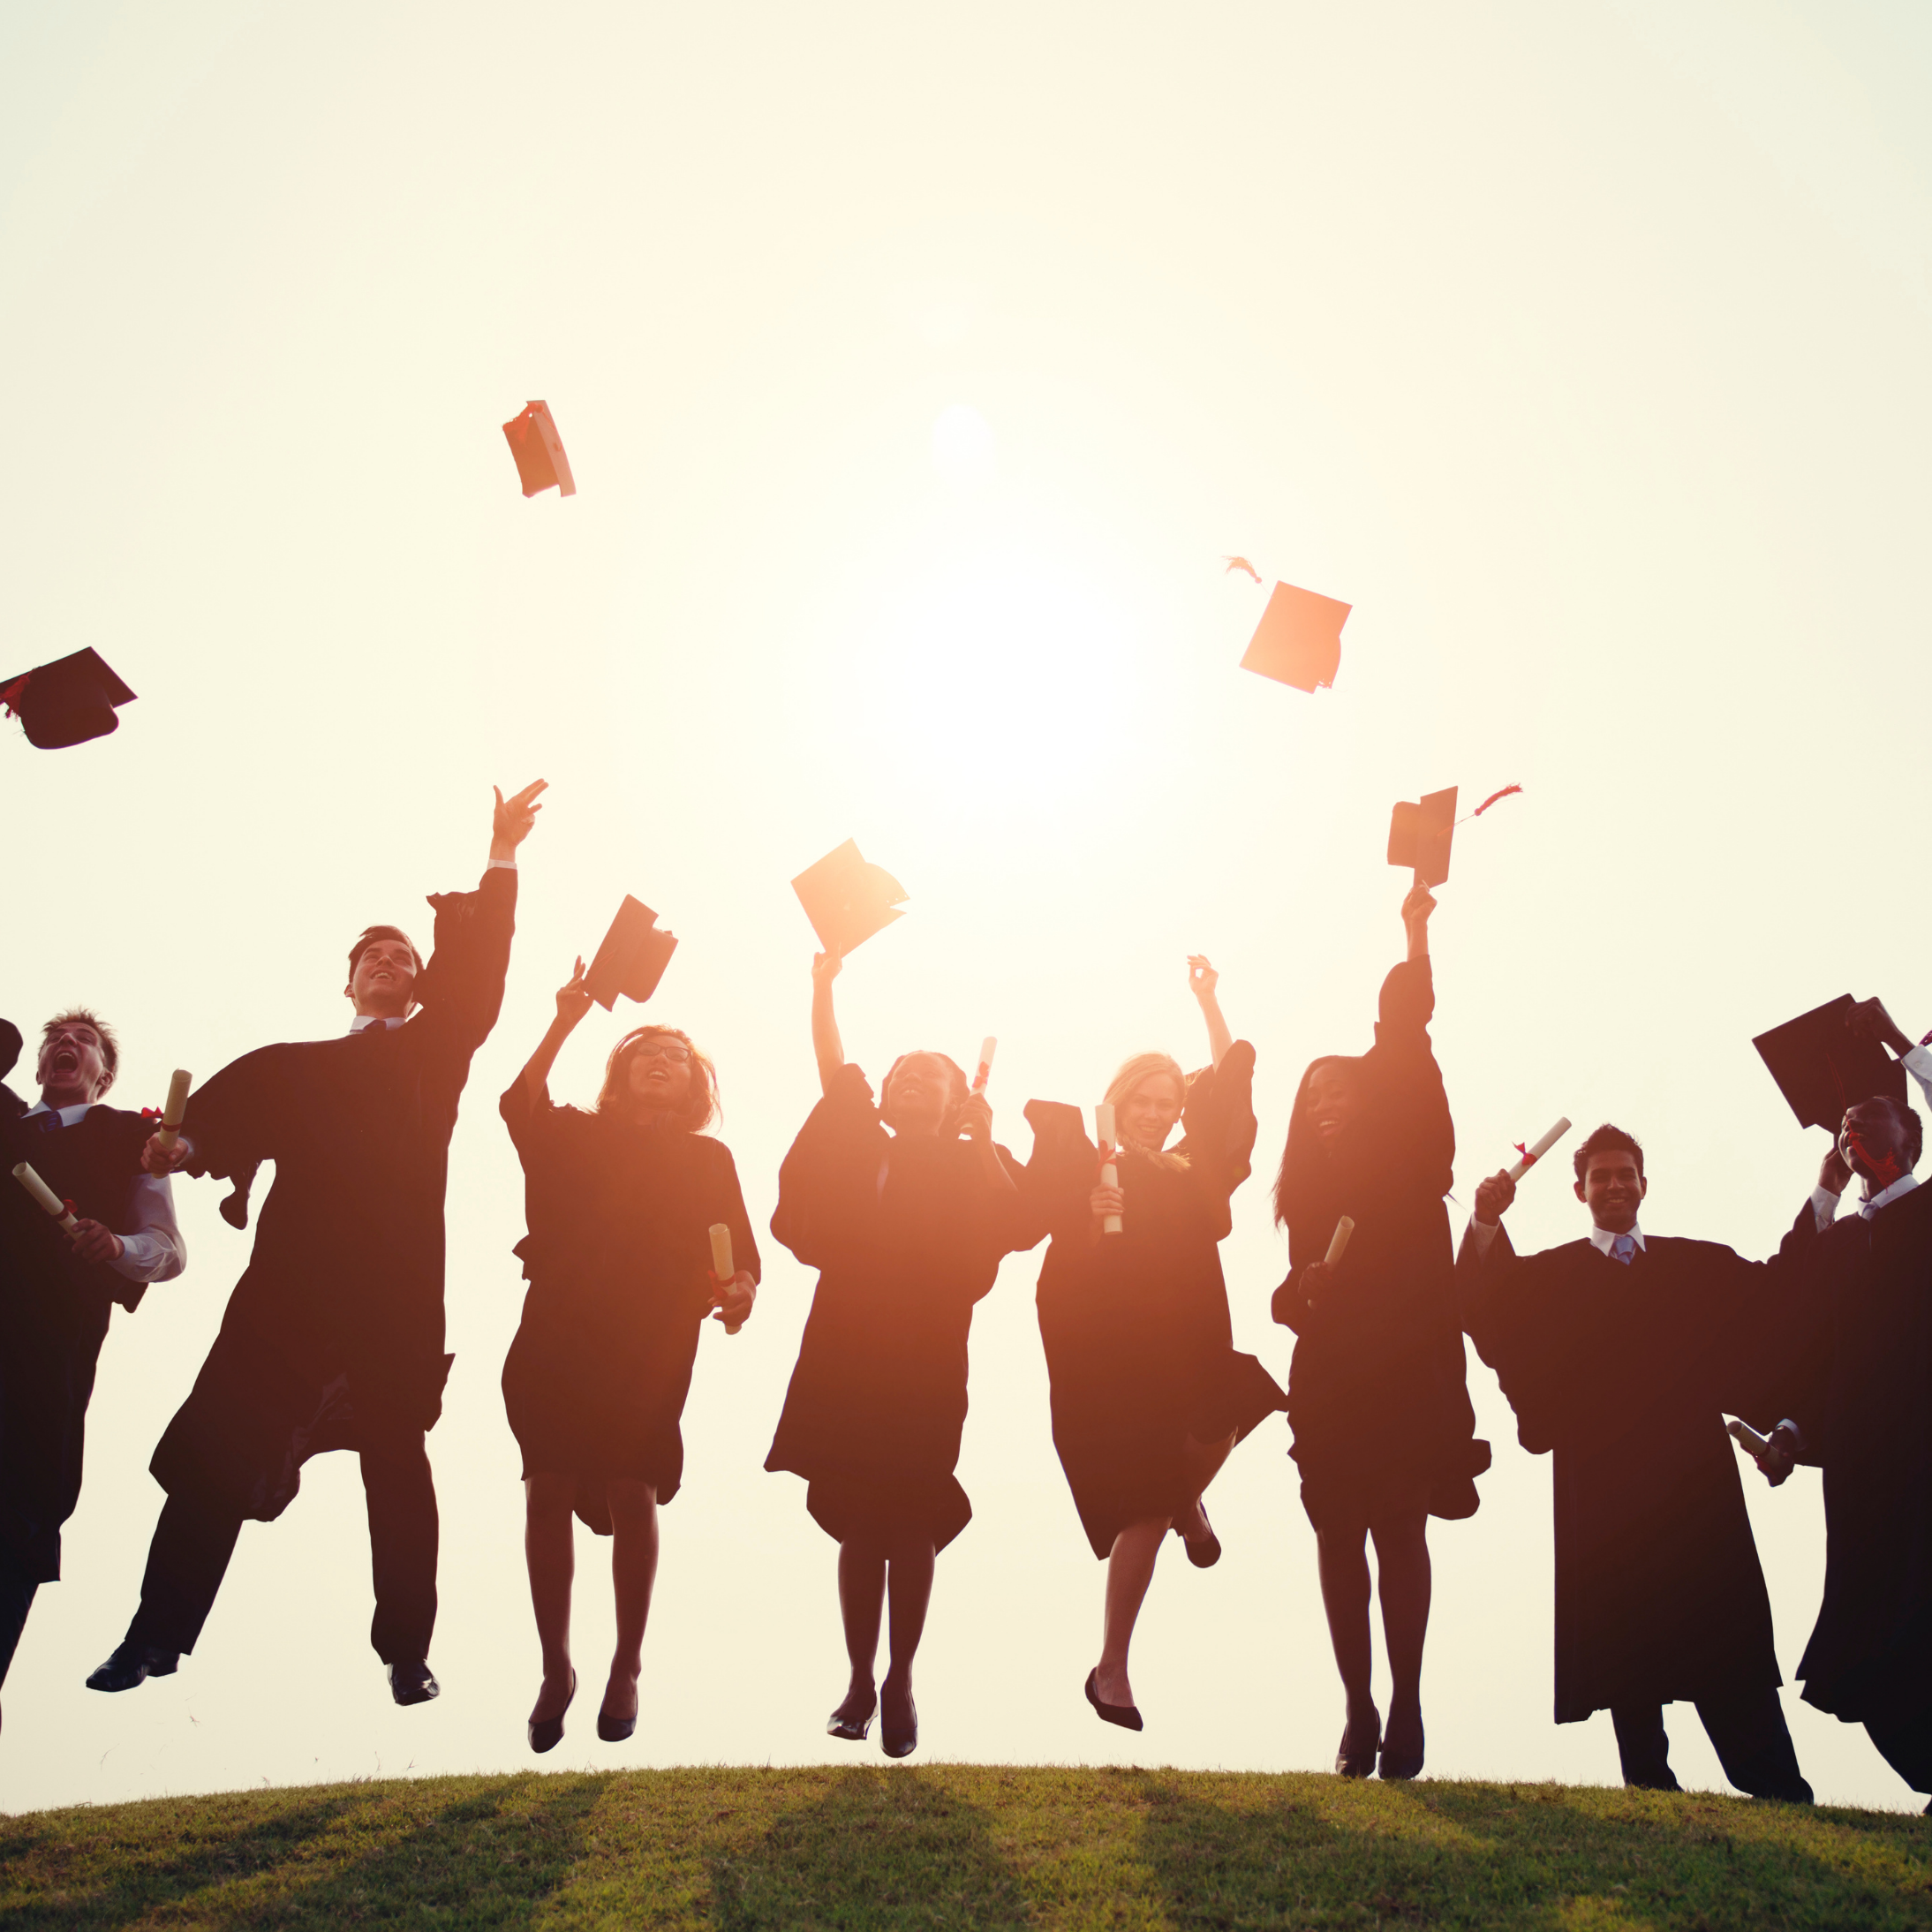 Illustration of graduates in gowns throwing caps in air